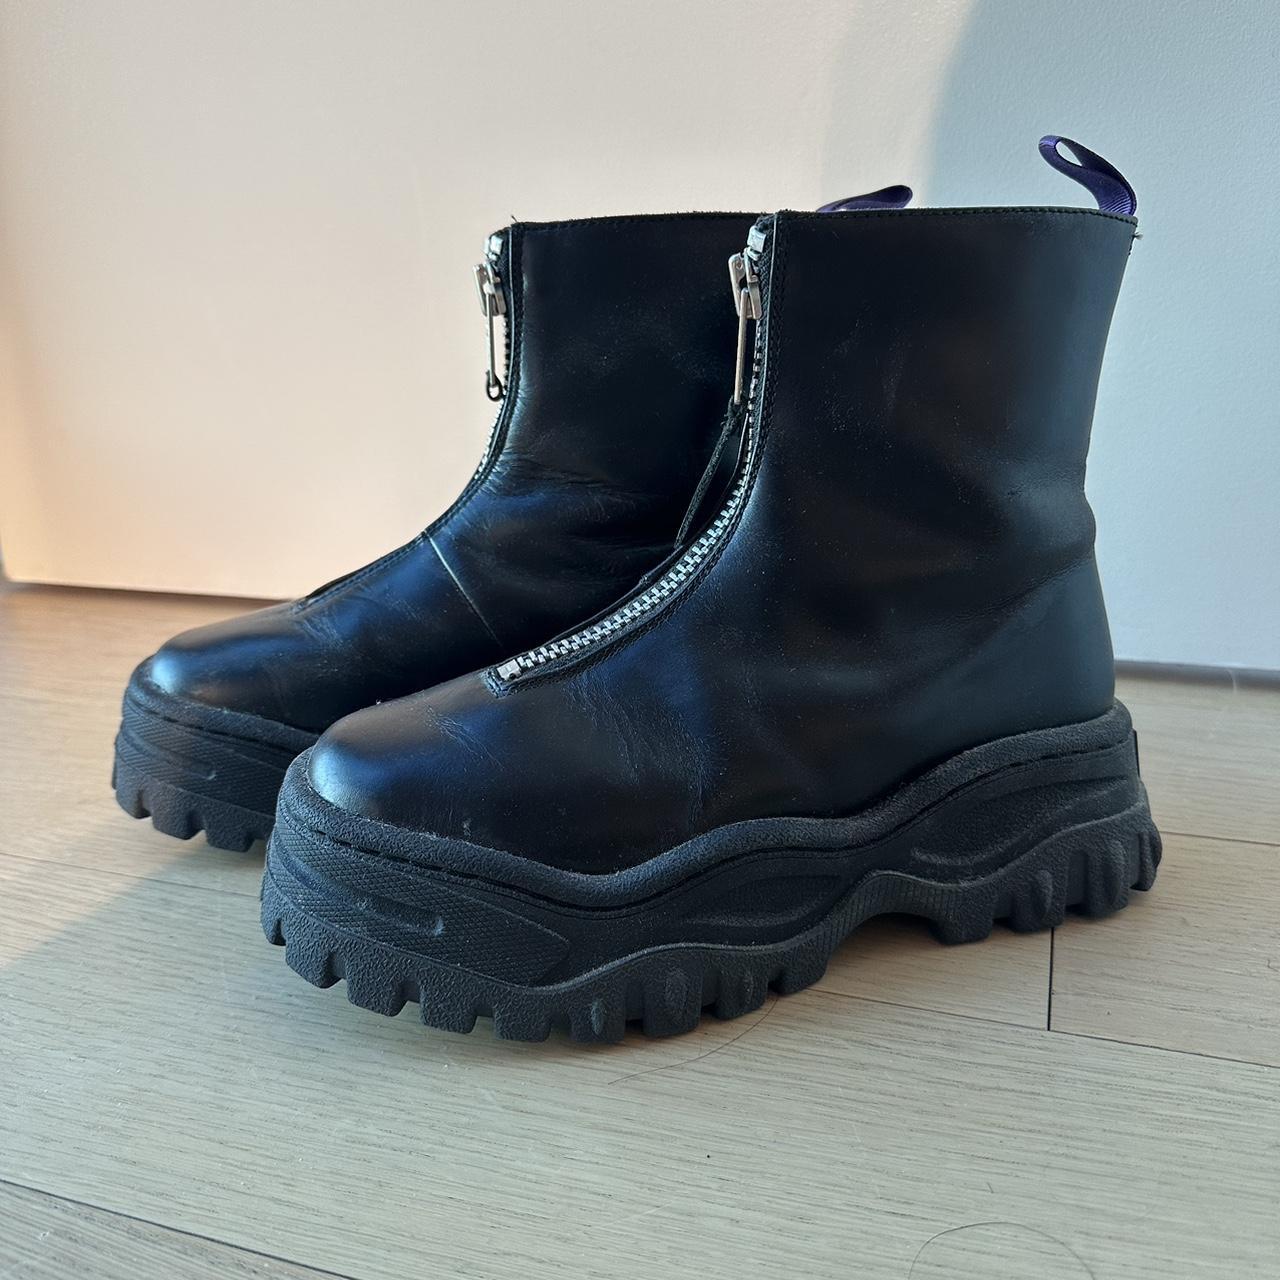 Eytys Raven Boots in Black Leather, size EU37. One... - Depop